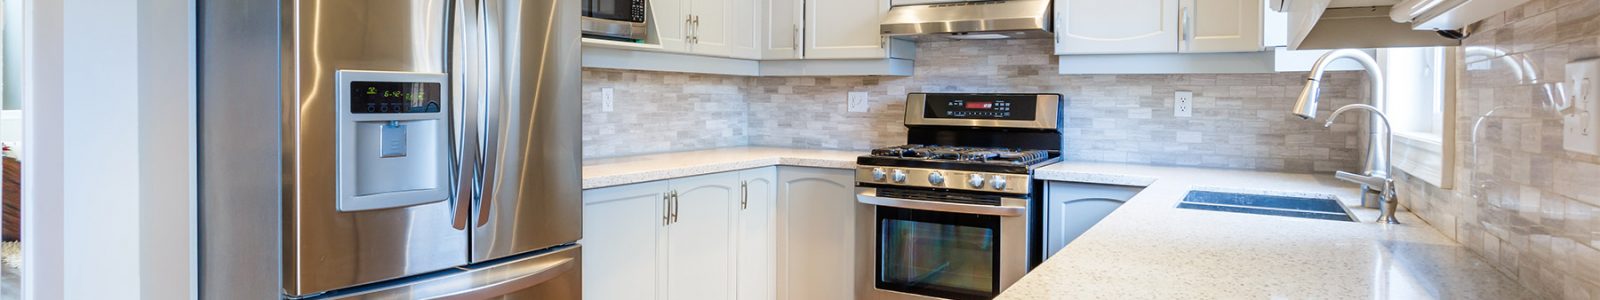 Residential Remodeling Contractor in Schaumburg, IL